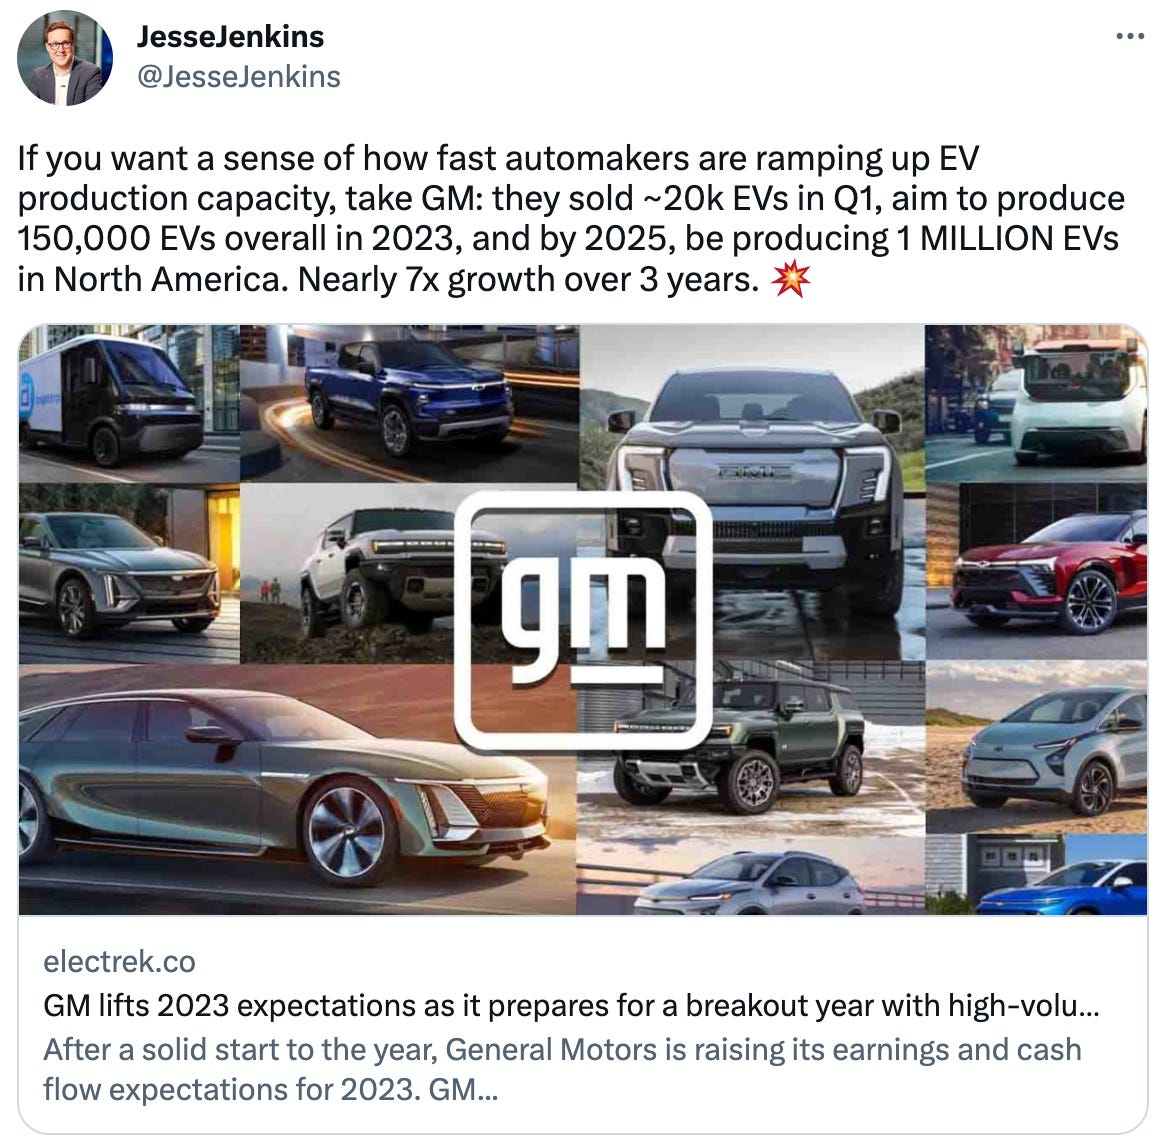  JesseJenkins @JesseJenkins If you want a sense of how fast automakers are ramping up EV production capacity, take GM: they sold ~20k EVs in Q1, aim to produce 150,000 EVs overall in 2023, and by 2025, be producing 1 MILLION EVs in North America. Nearly 7x growth over 3 years. 💥